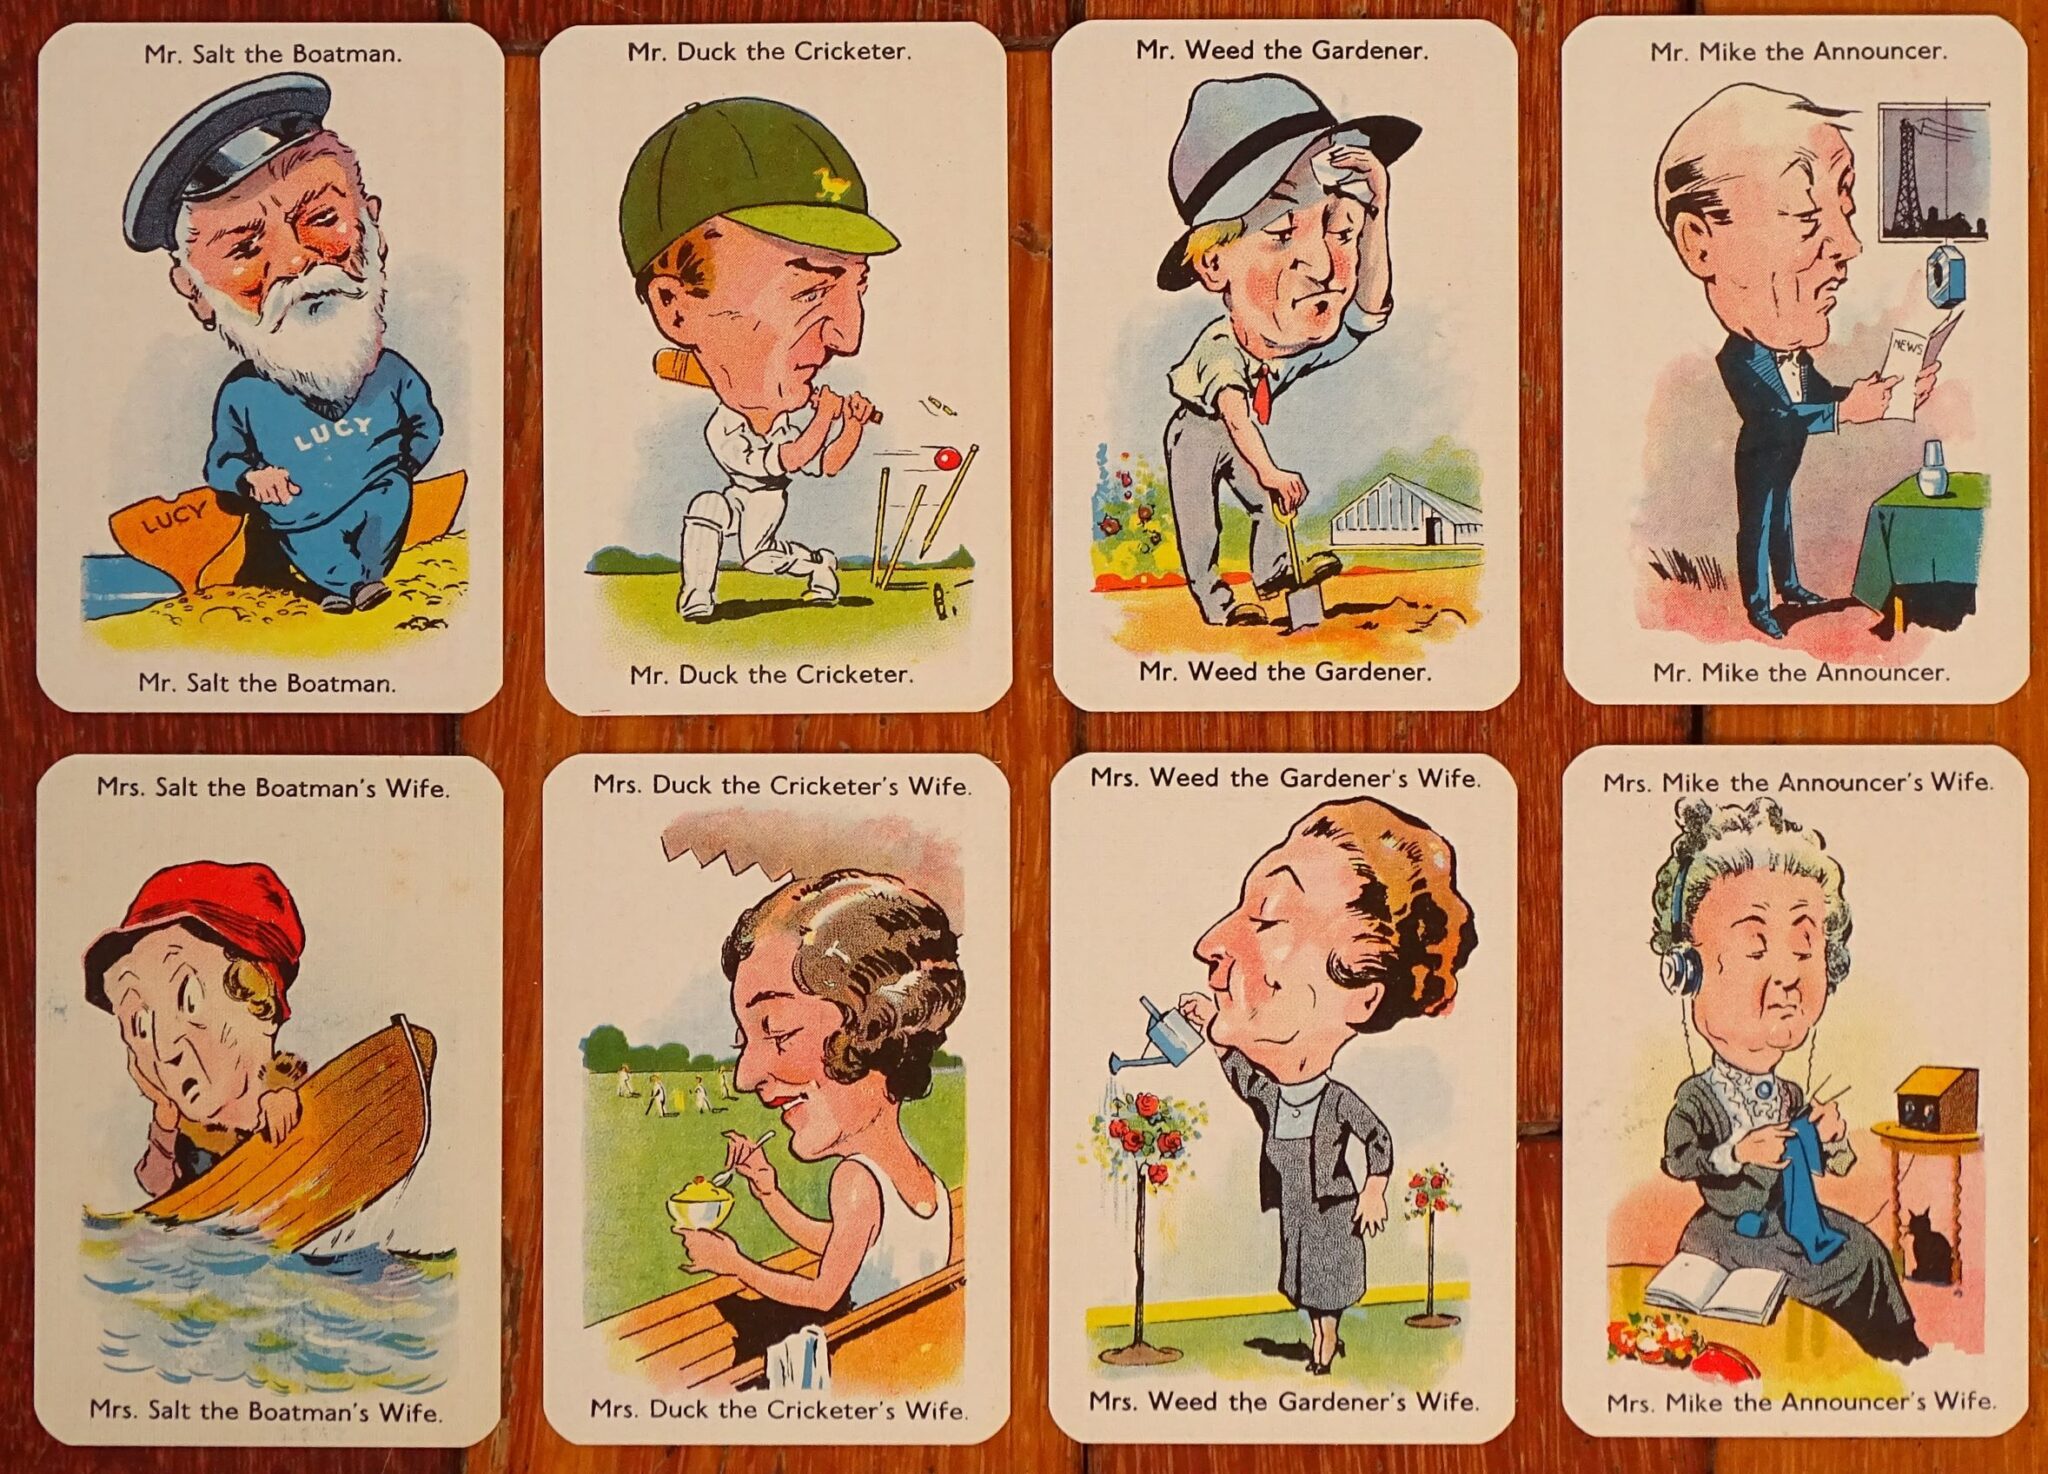 1935-happy-families-card-game-promotional-deck-produced-for-nestl-england-tomsk3000